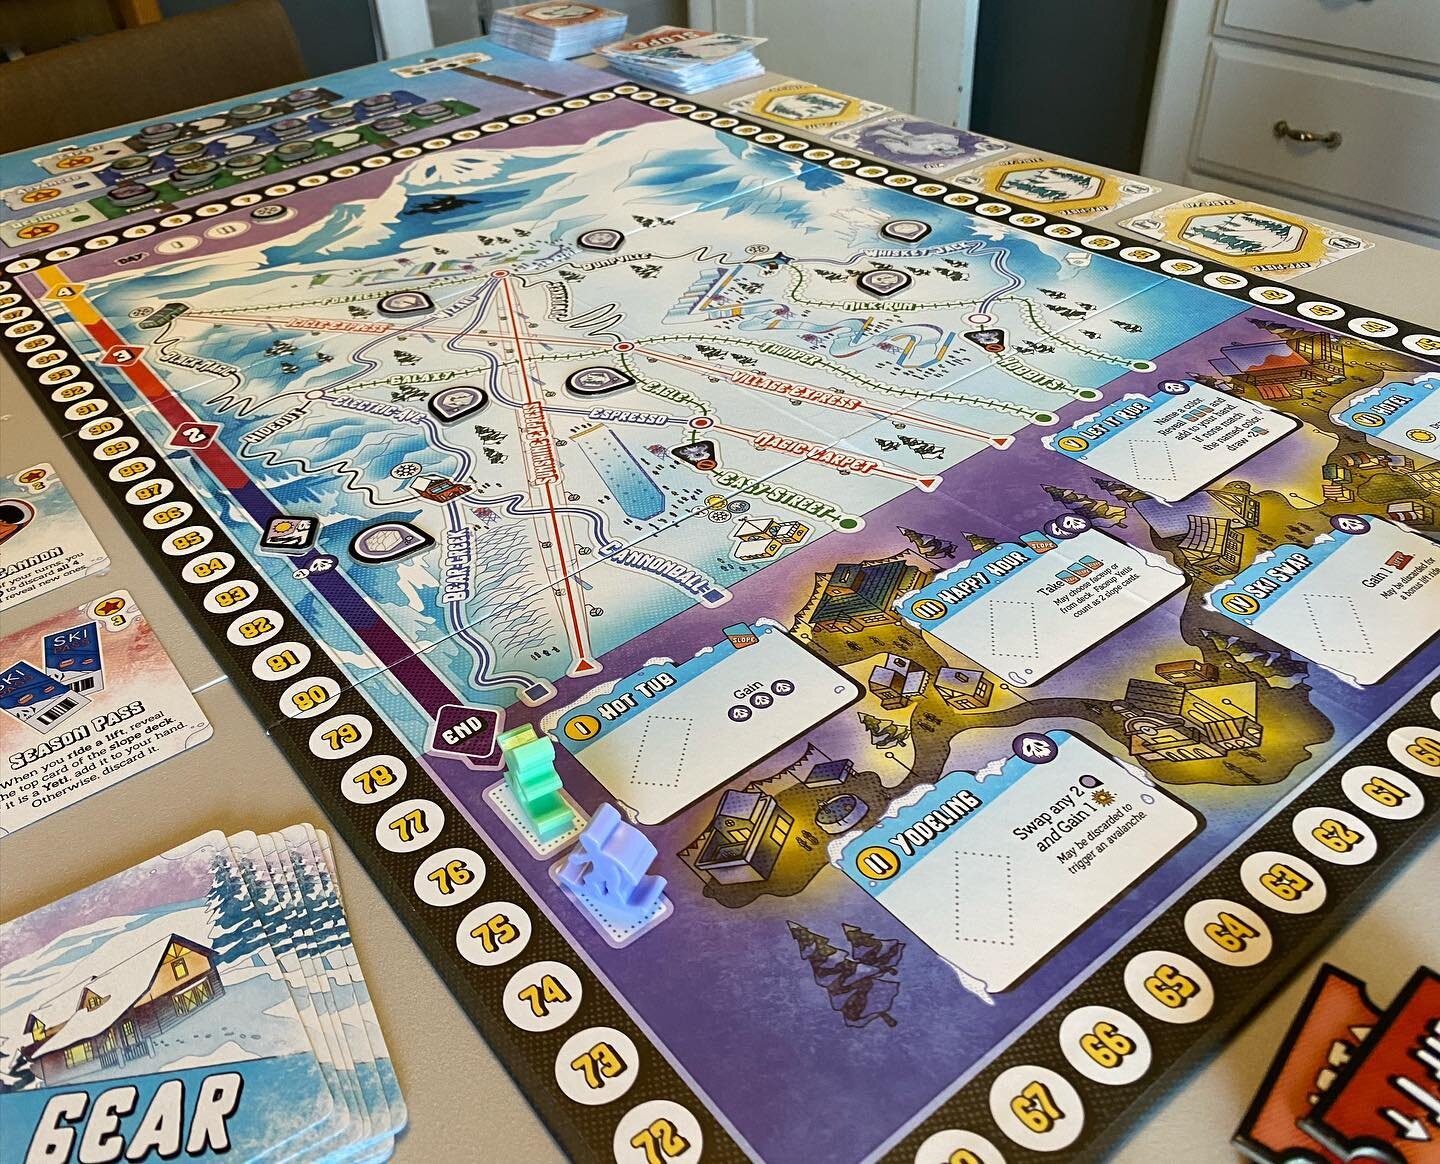 Today was too hot so we cooled off by playing #skullcanyonskifest 🥶 it's a really fun twist on #tickettoride!